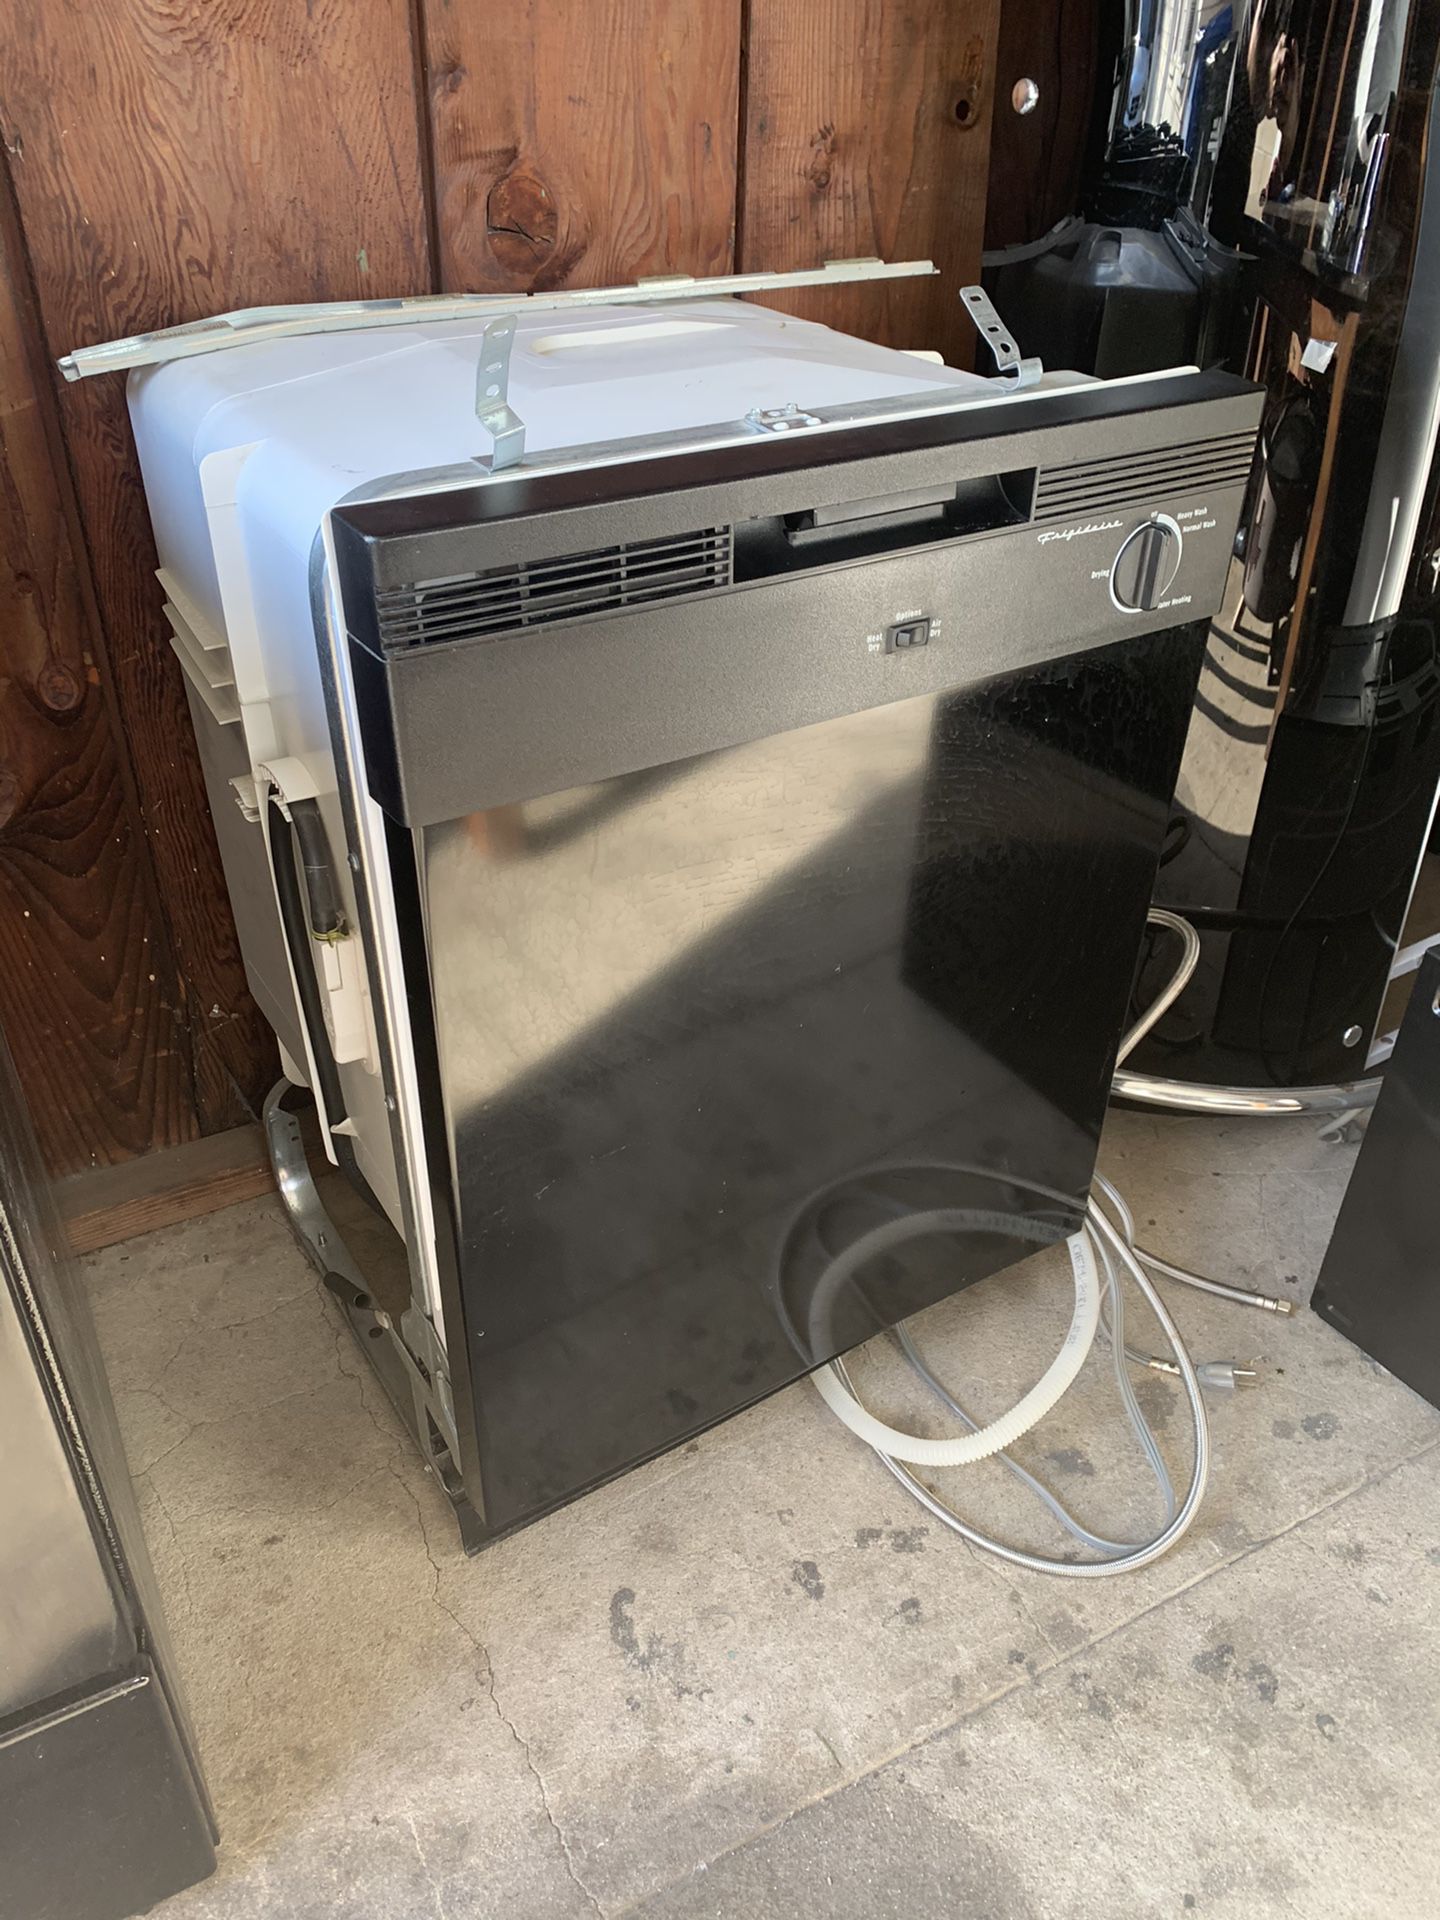 Dish washer , good condition, works great . We remodeled our kitchen and install a new appliances only reason why no longer need.